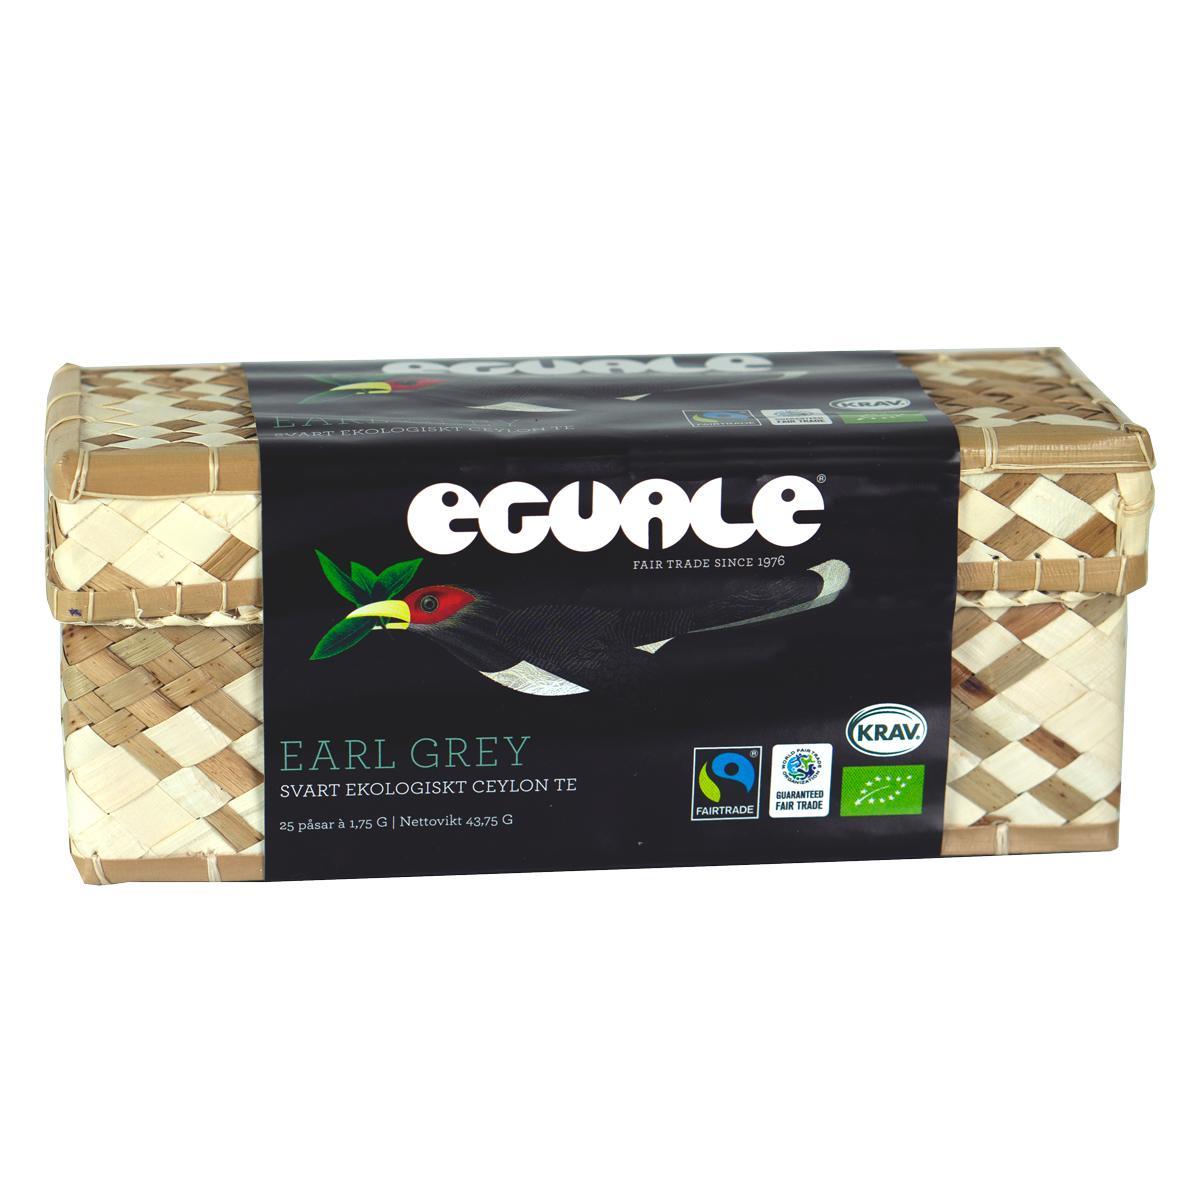 Eguale's Eguale Earl Gray '